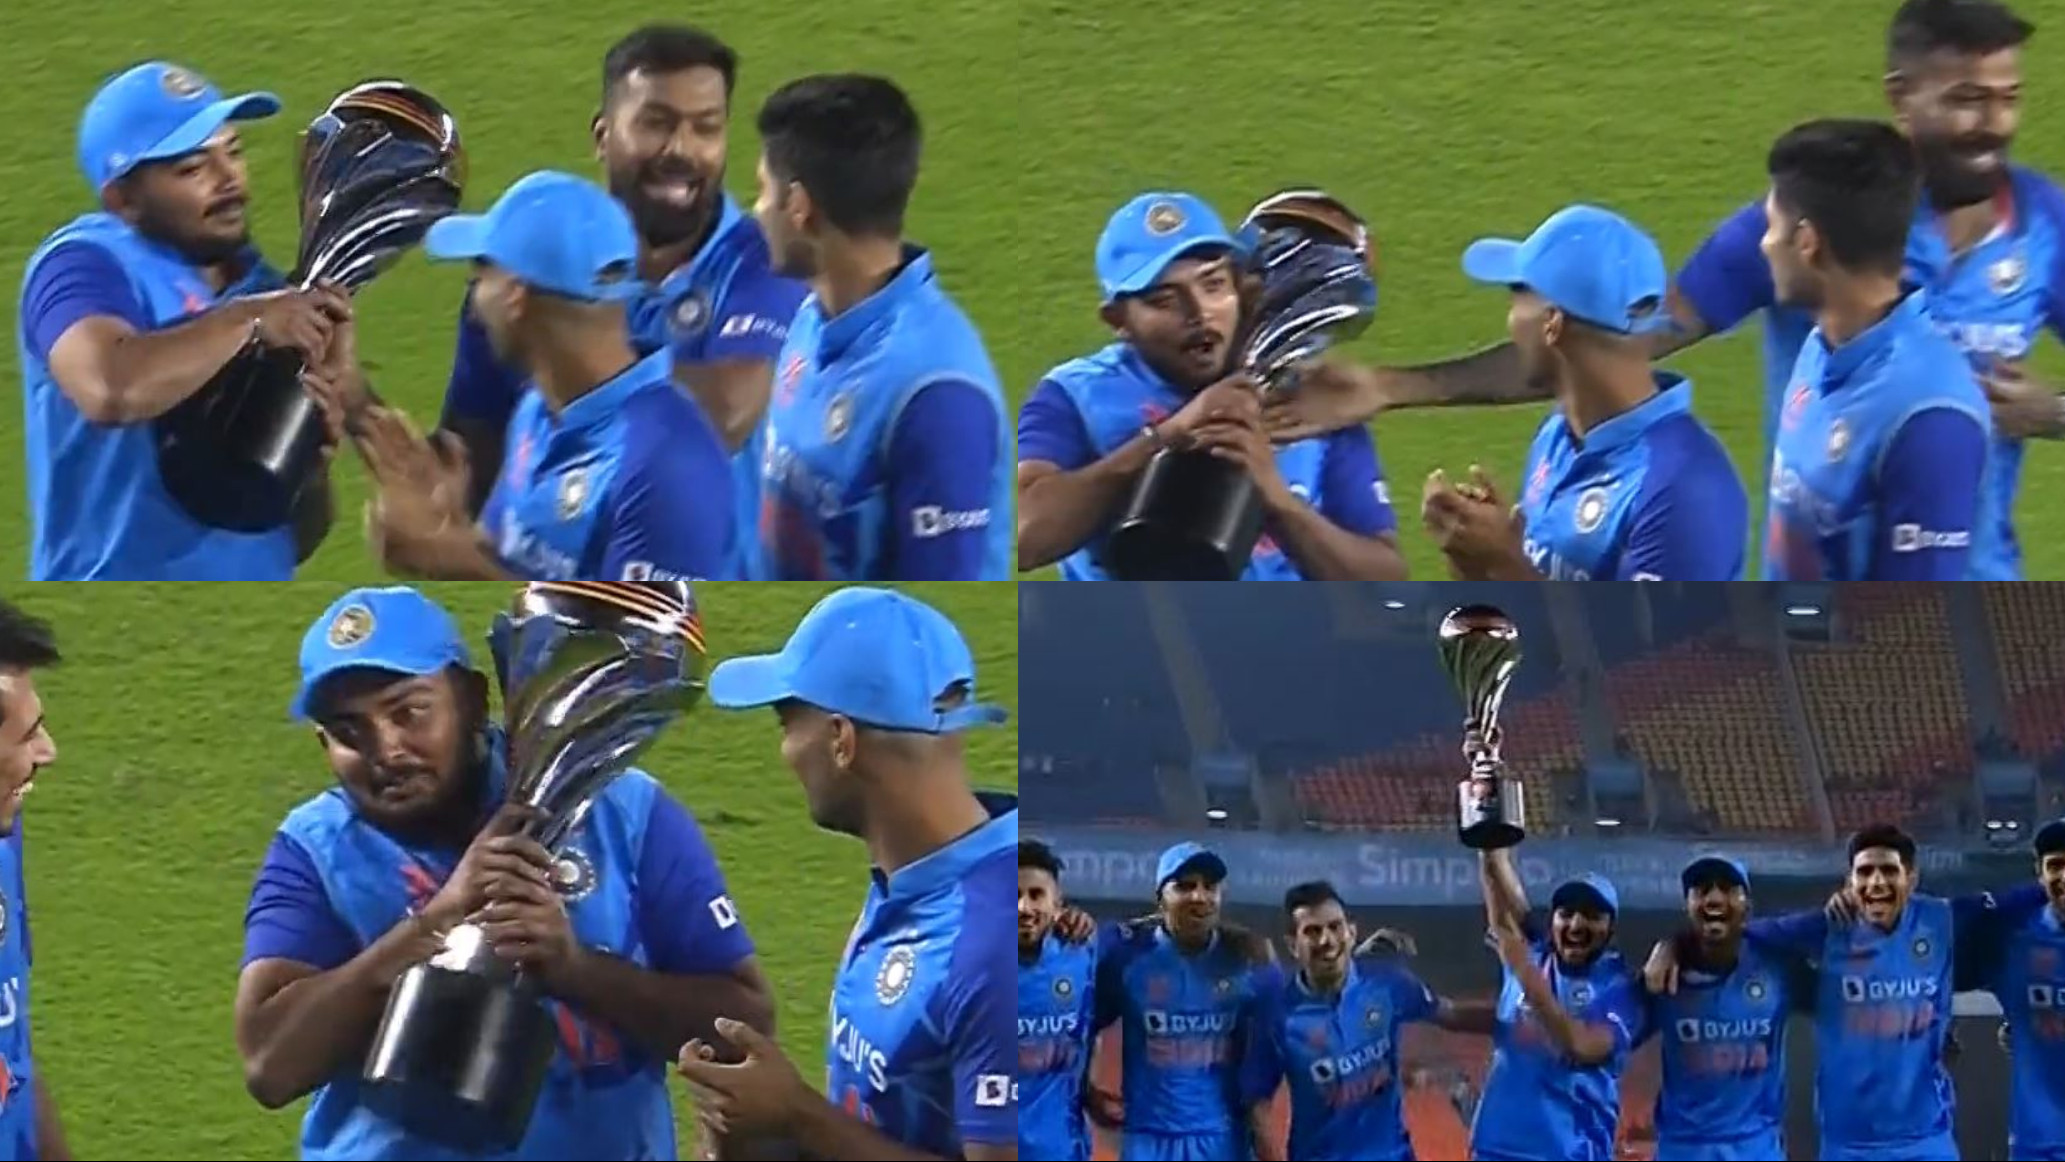 IND v NZ 2023: WATCH- Hardik Pandya hands over winner's trophy to an excited Prithvi Shaw after T20I series win